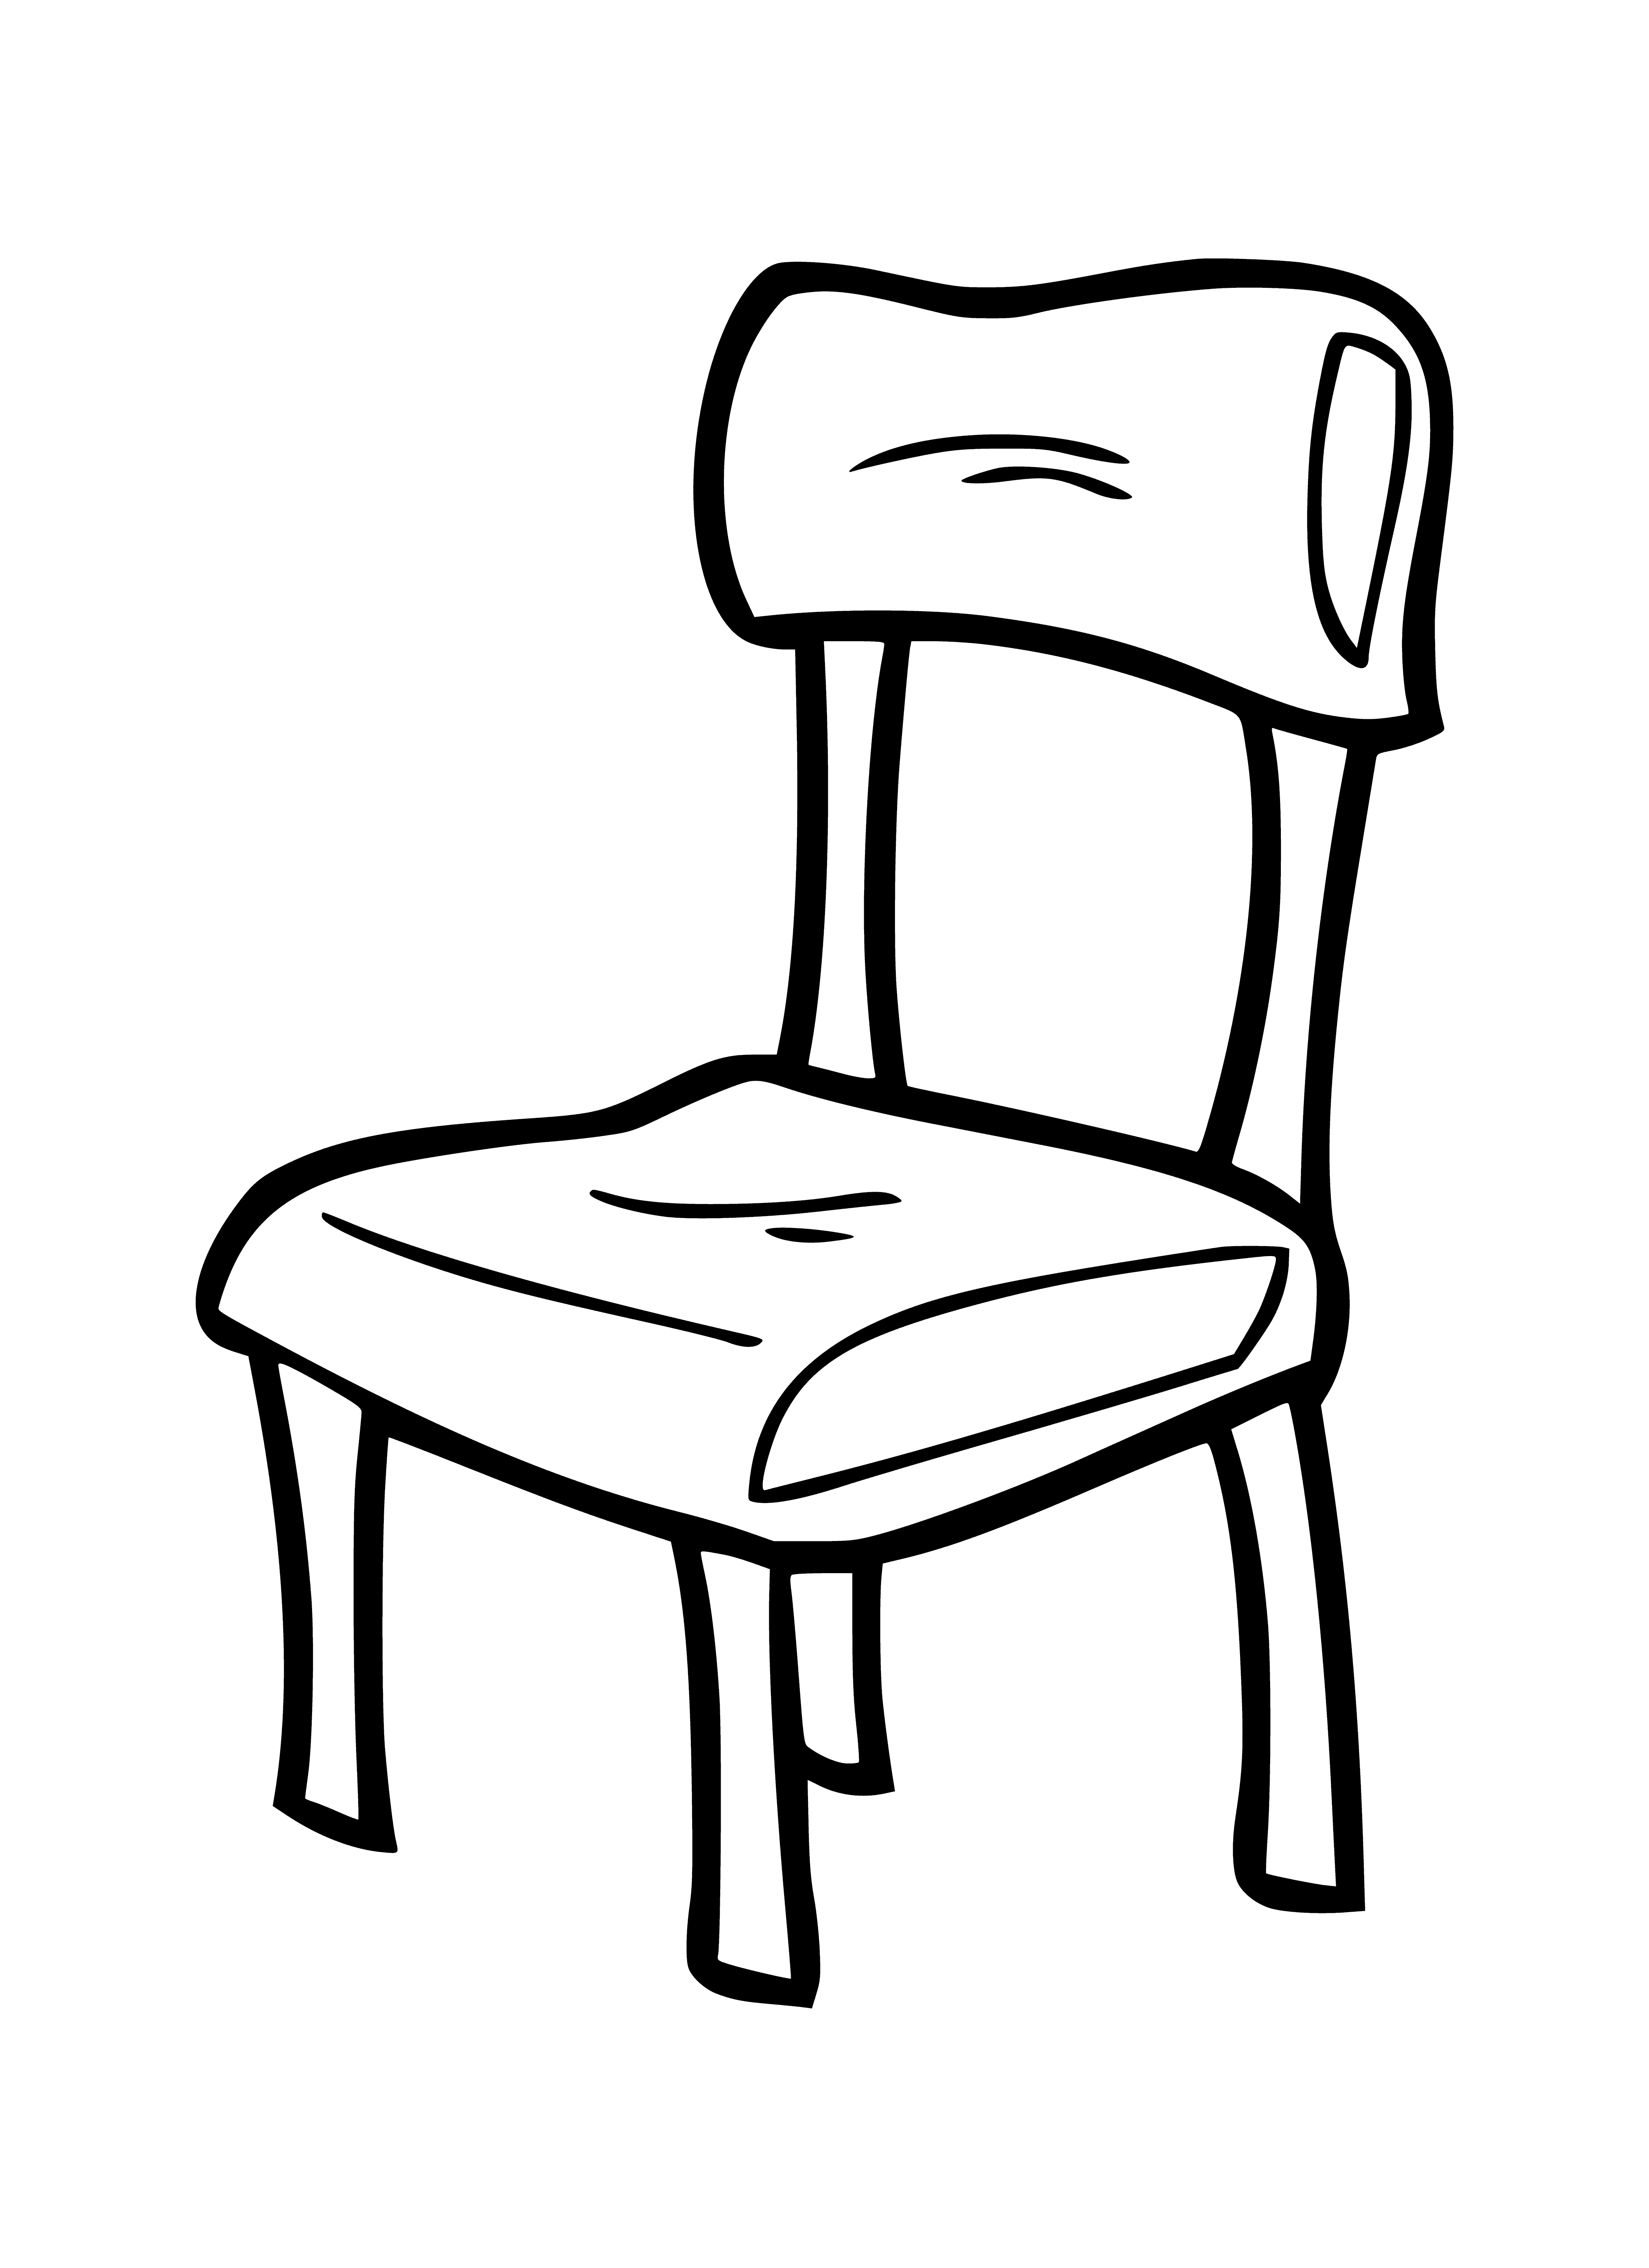 Chair coloring page